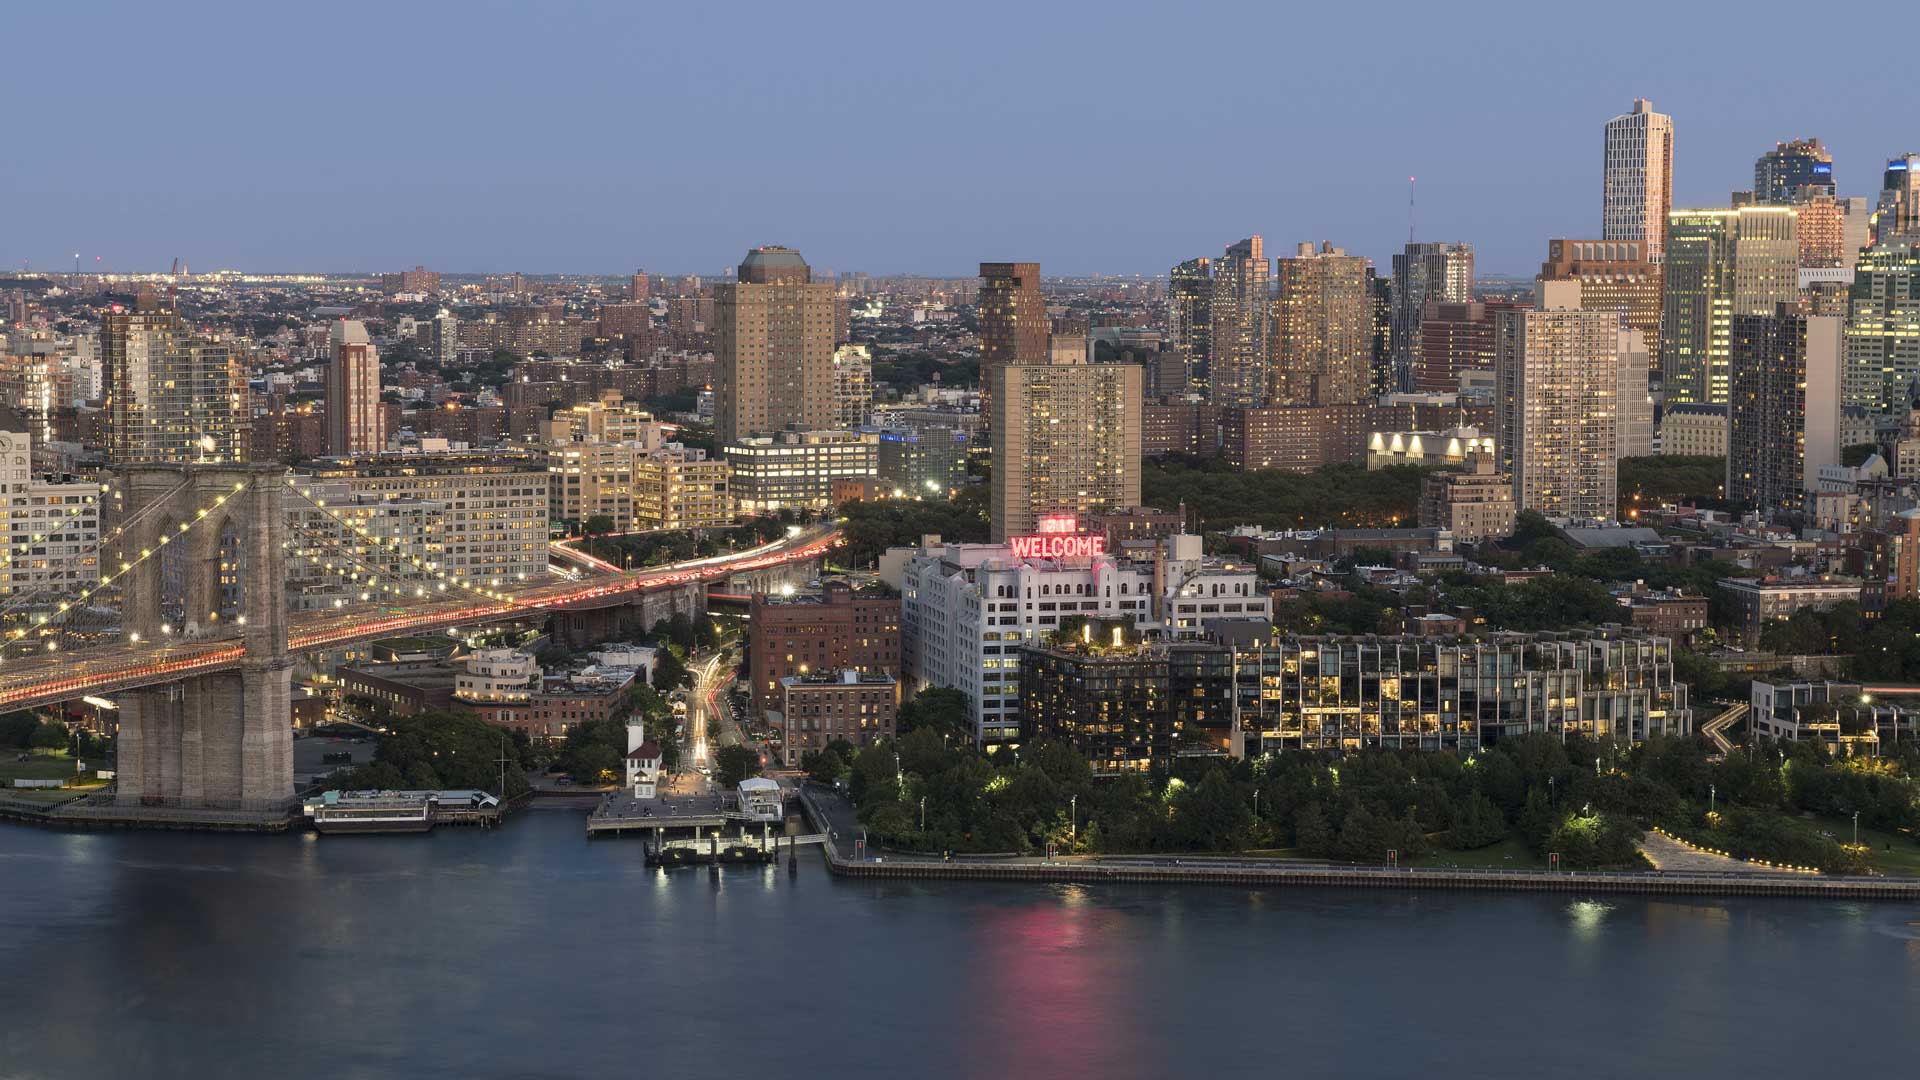 Aerial view of Panorama Brooklyn and Welcome rooftop sign